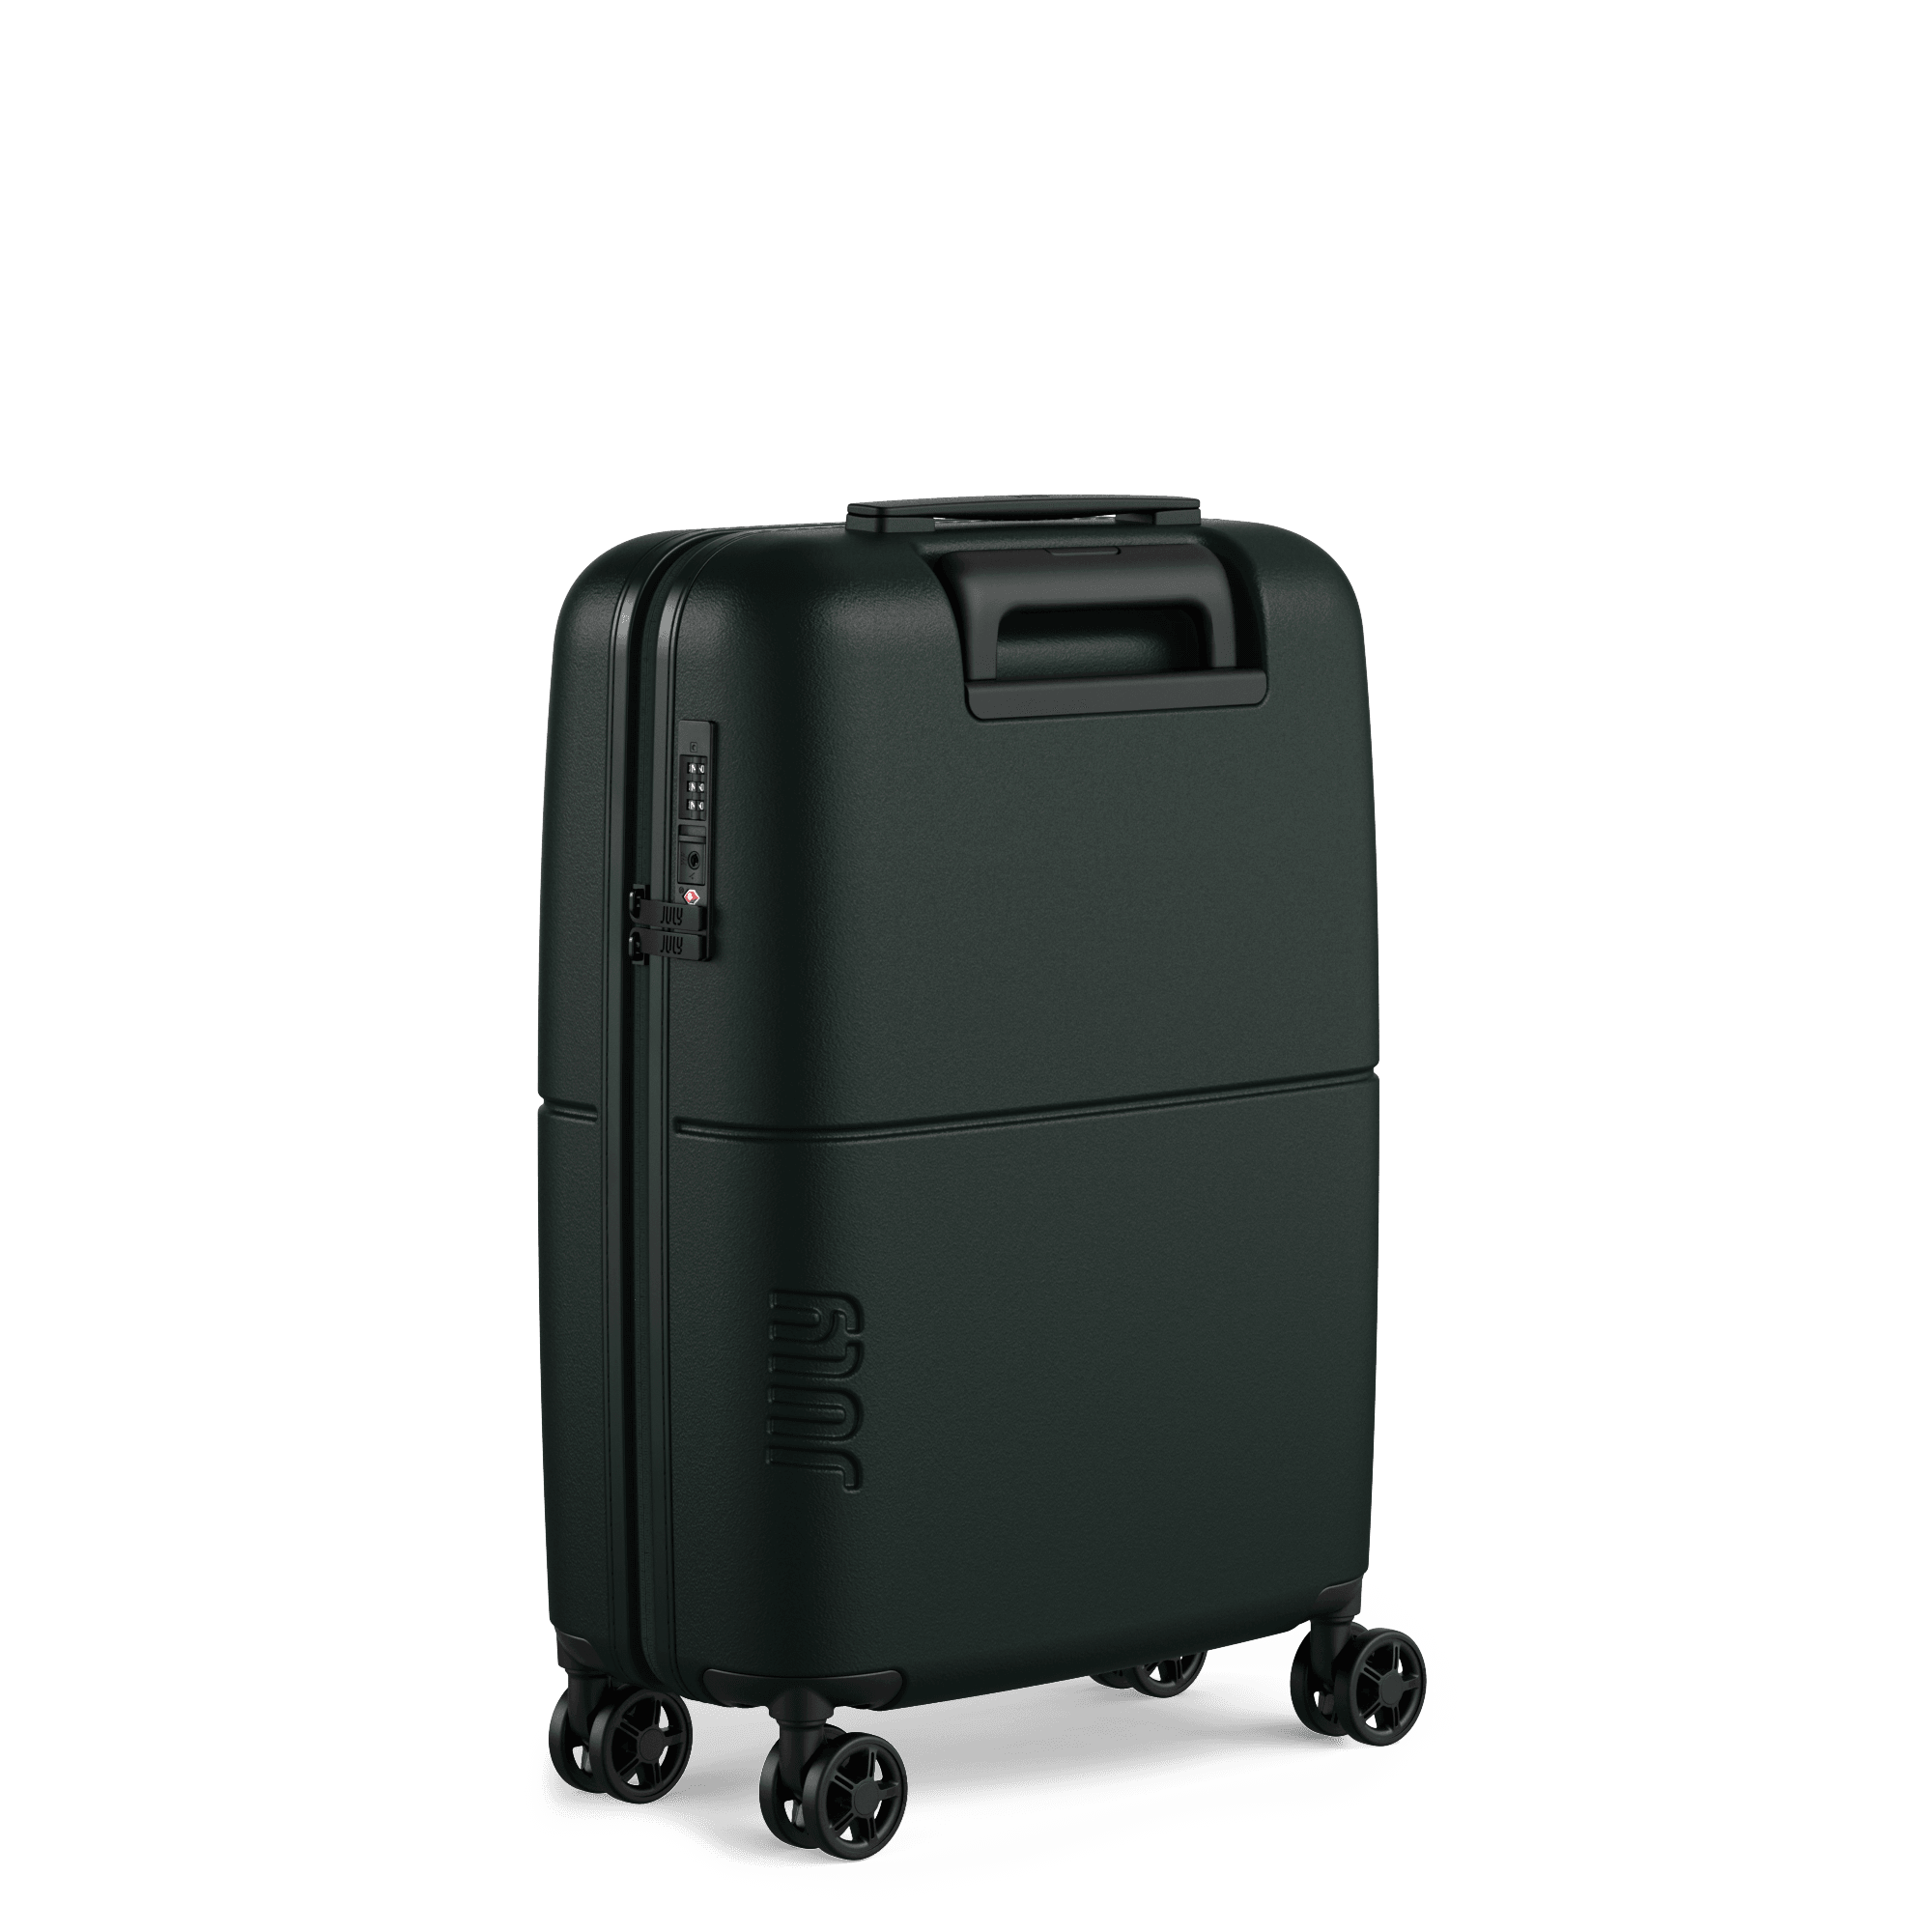 Carry On Light | Lightweight Suitcase | July